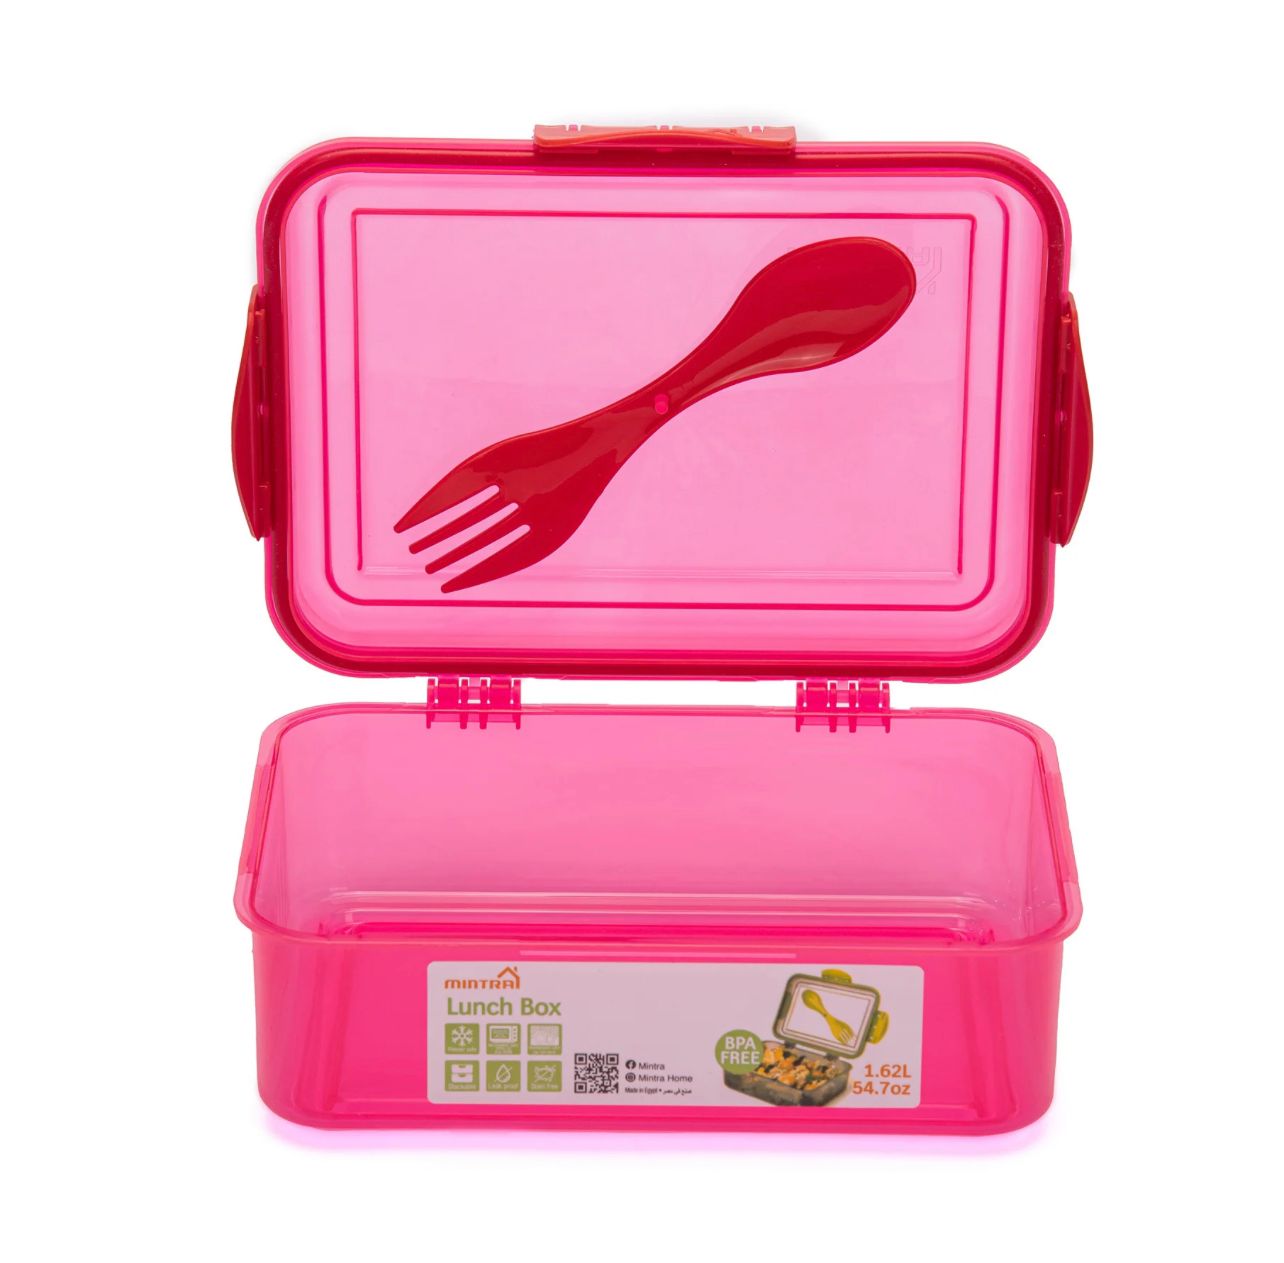 Mintra Lunch box 1.62 L with Fork & Spoon